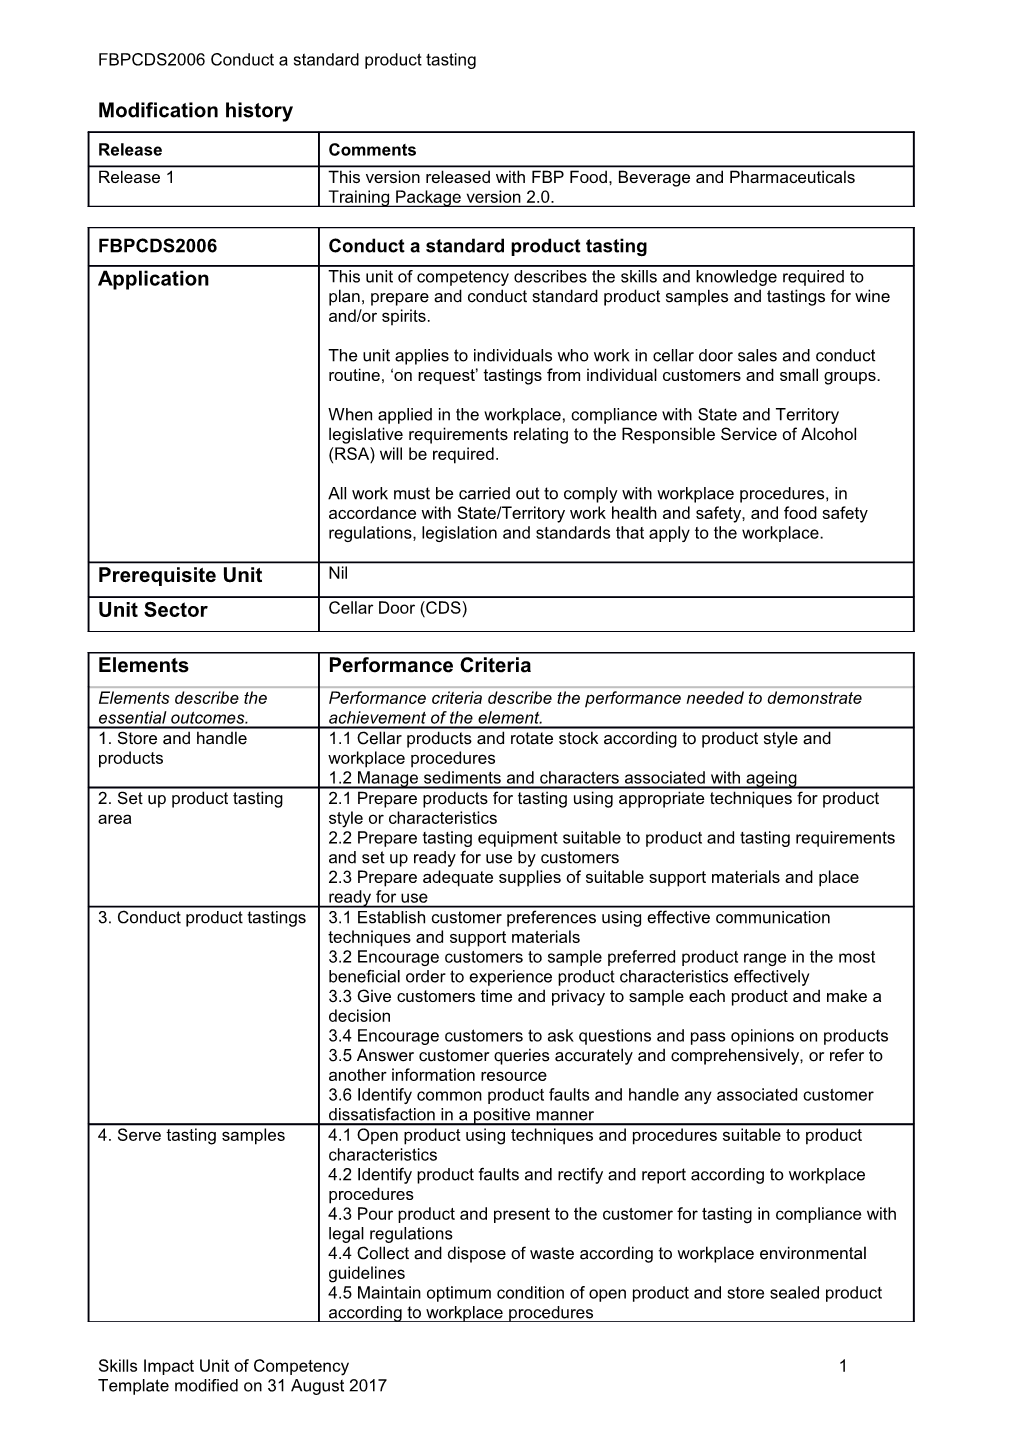 Skills Impact Unit of Competency Template s6